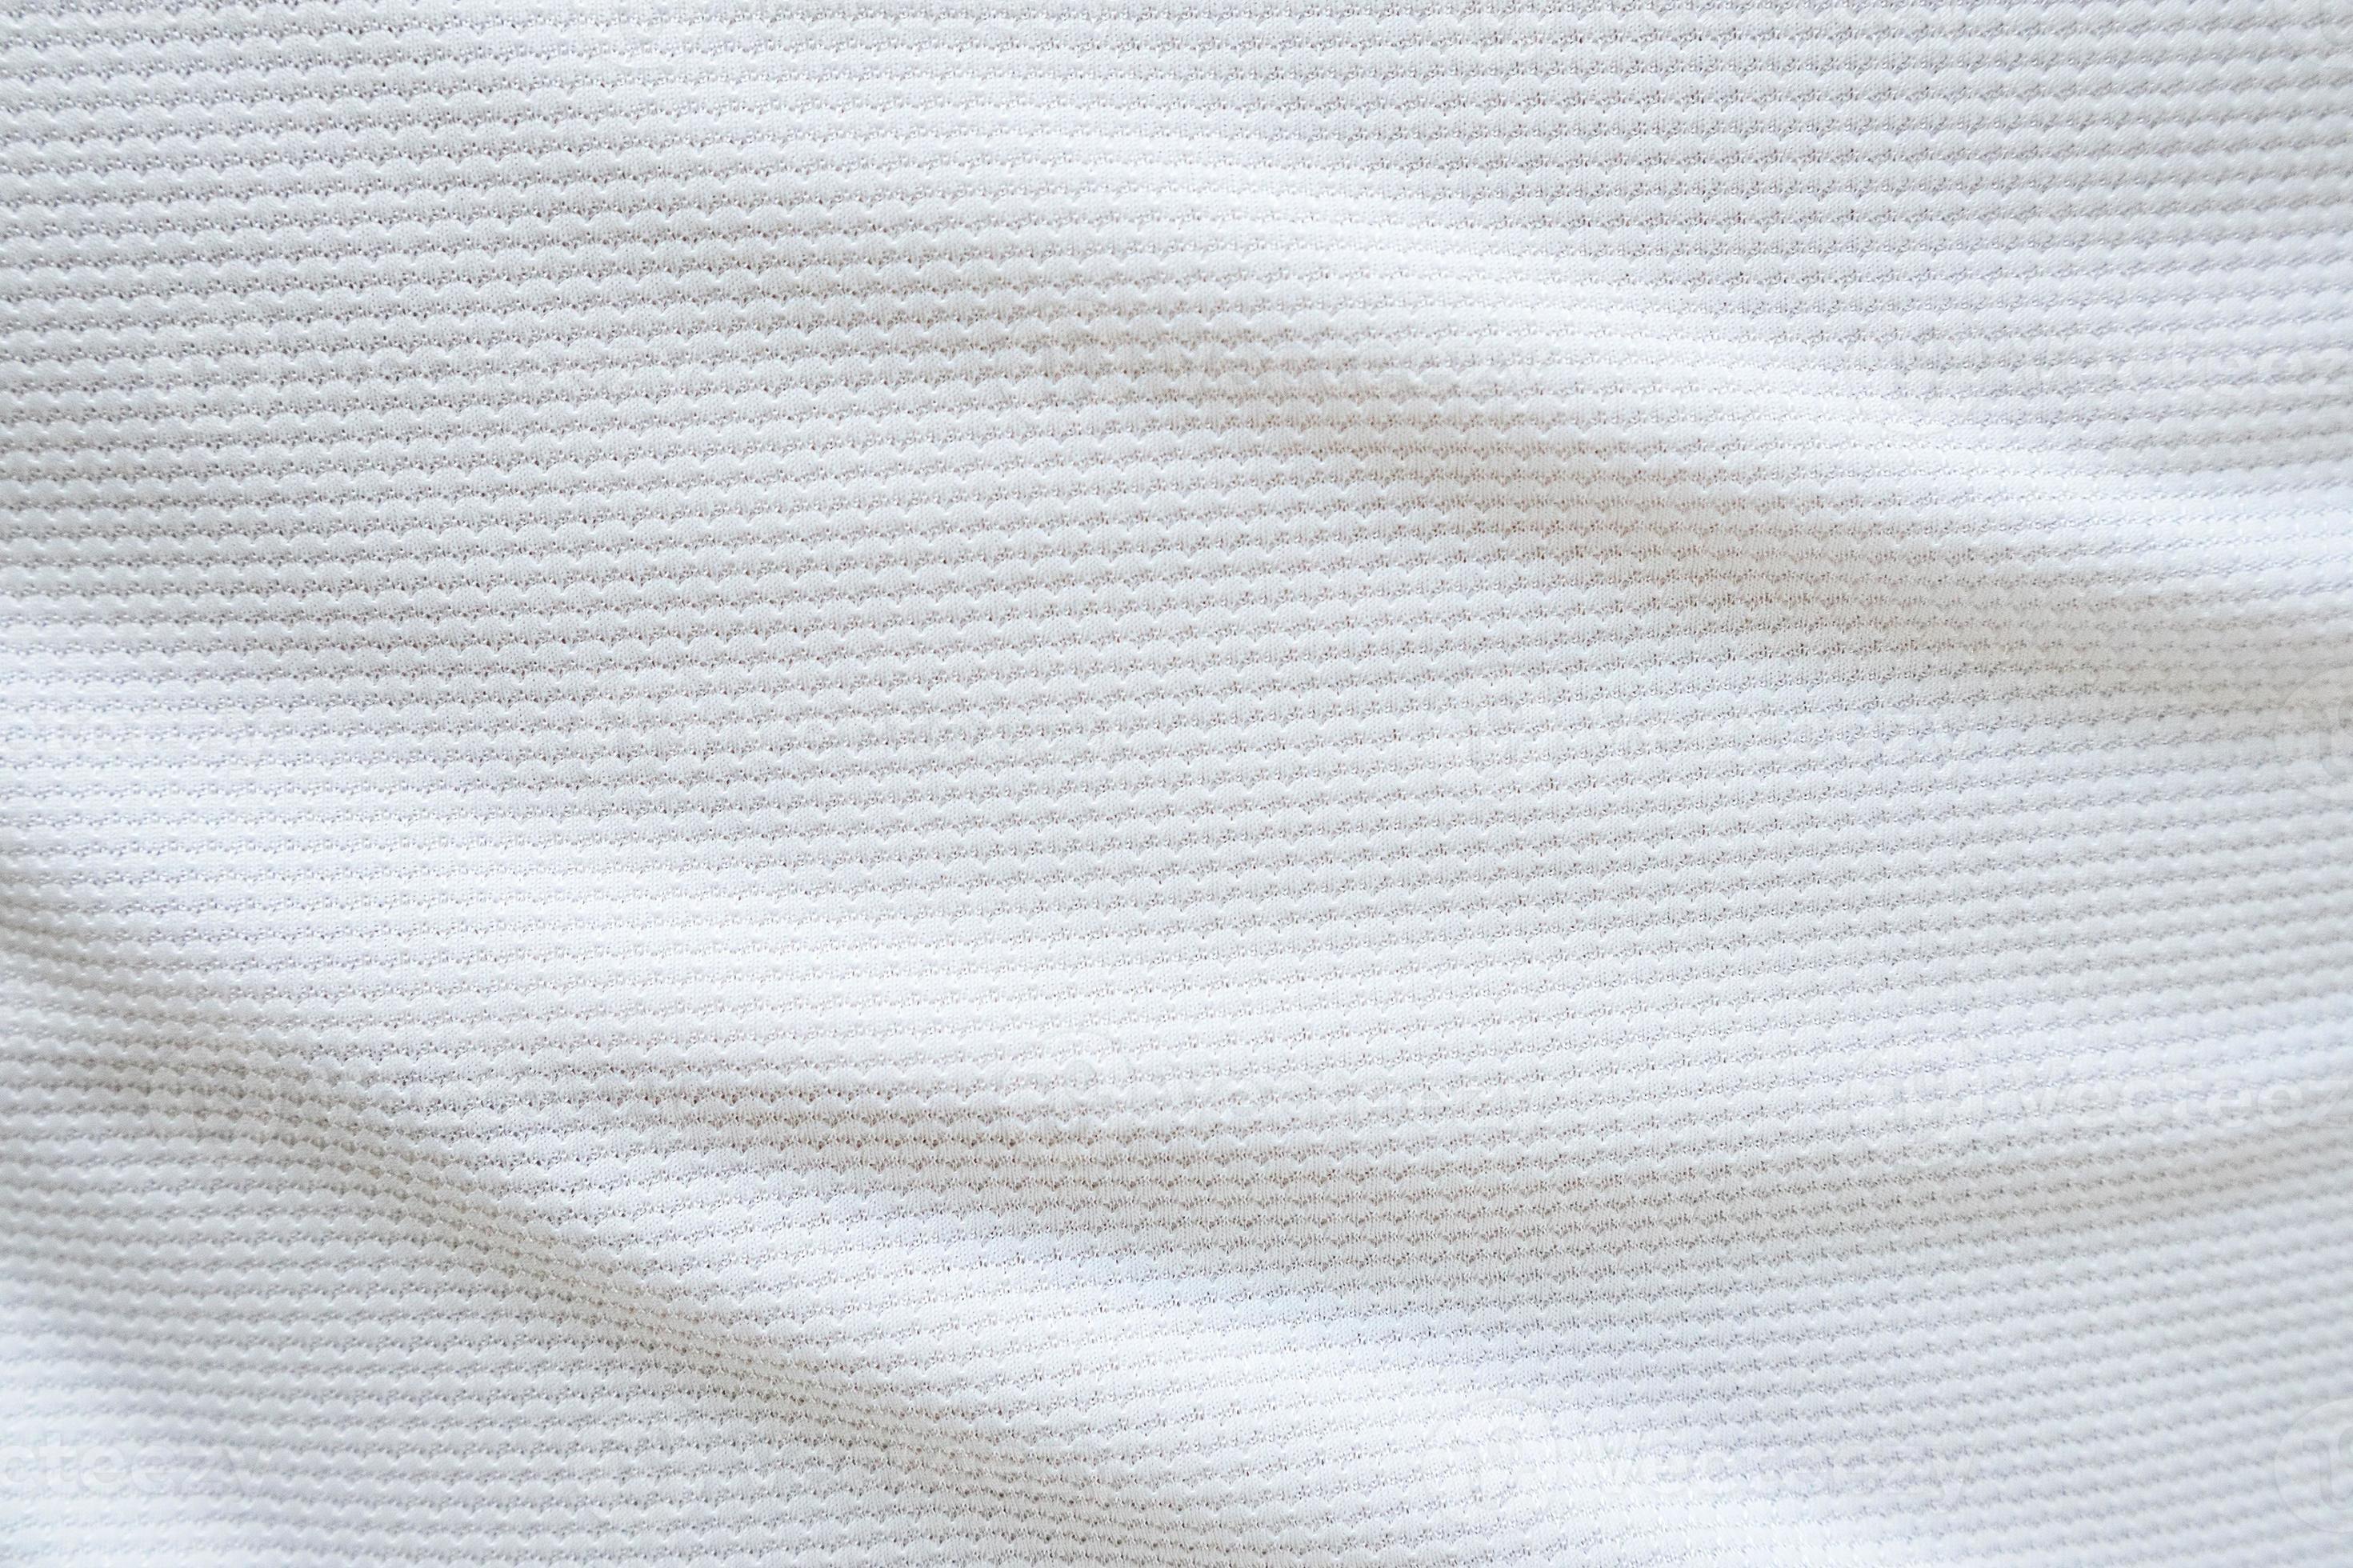 White football jersey clothing fabric texture sports wear background ...